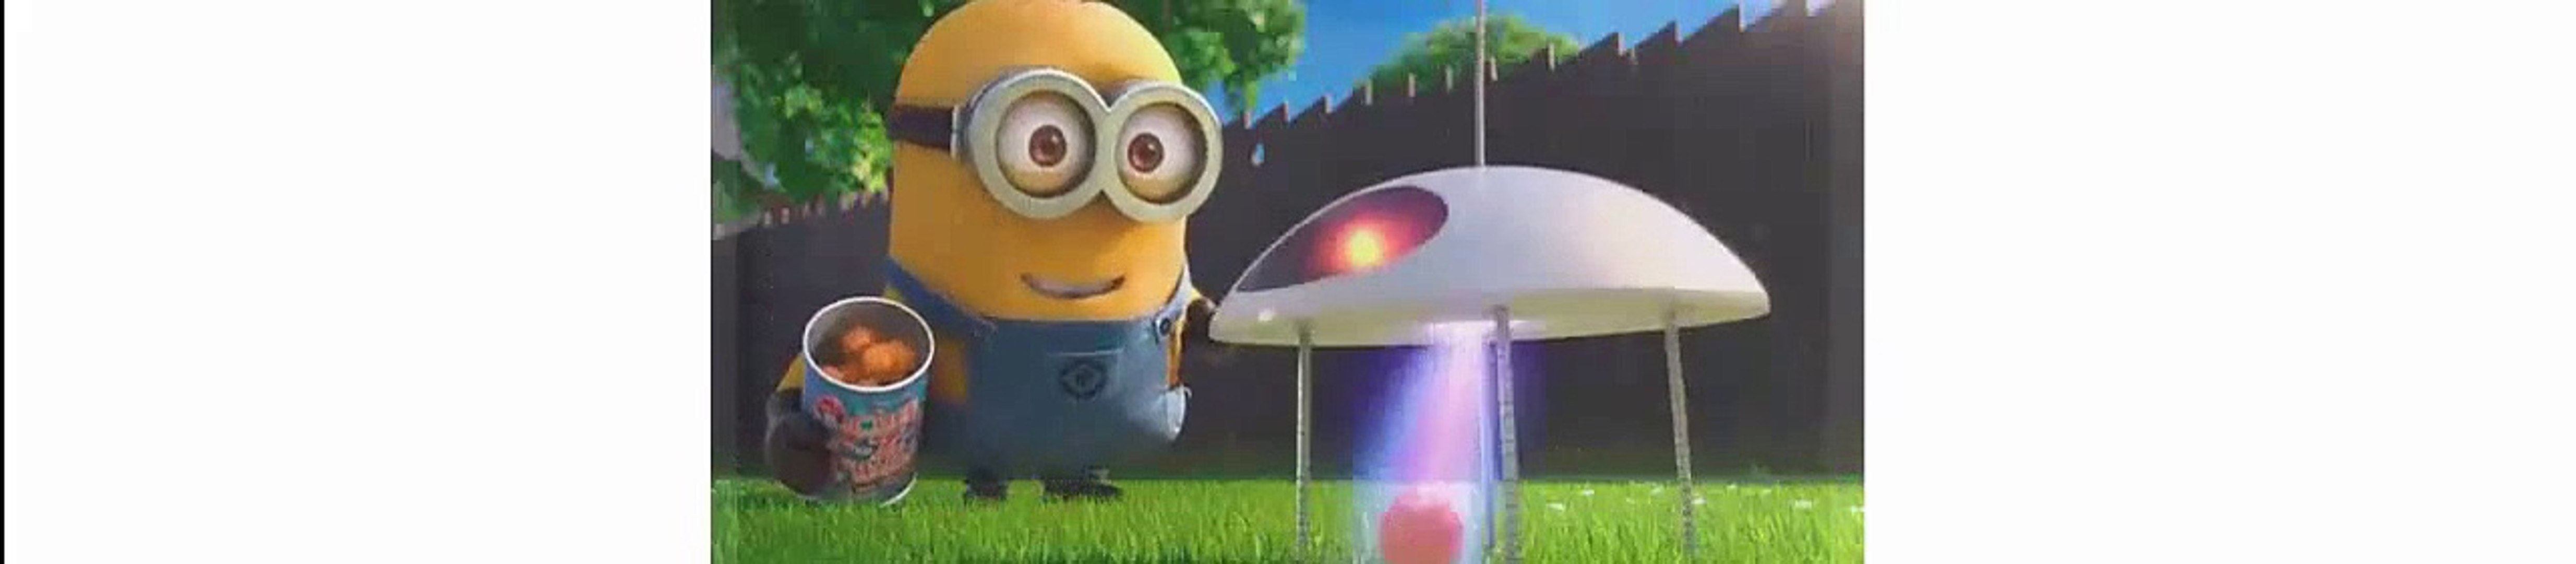 Minions 2015 - Despicable Me Mini Movie Puppy - Funny Movies Cartoon Clips  Animation - Dailymotion Video